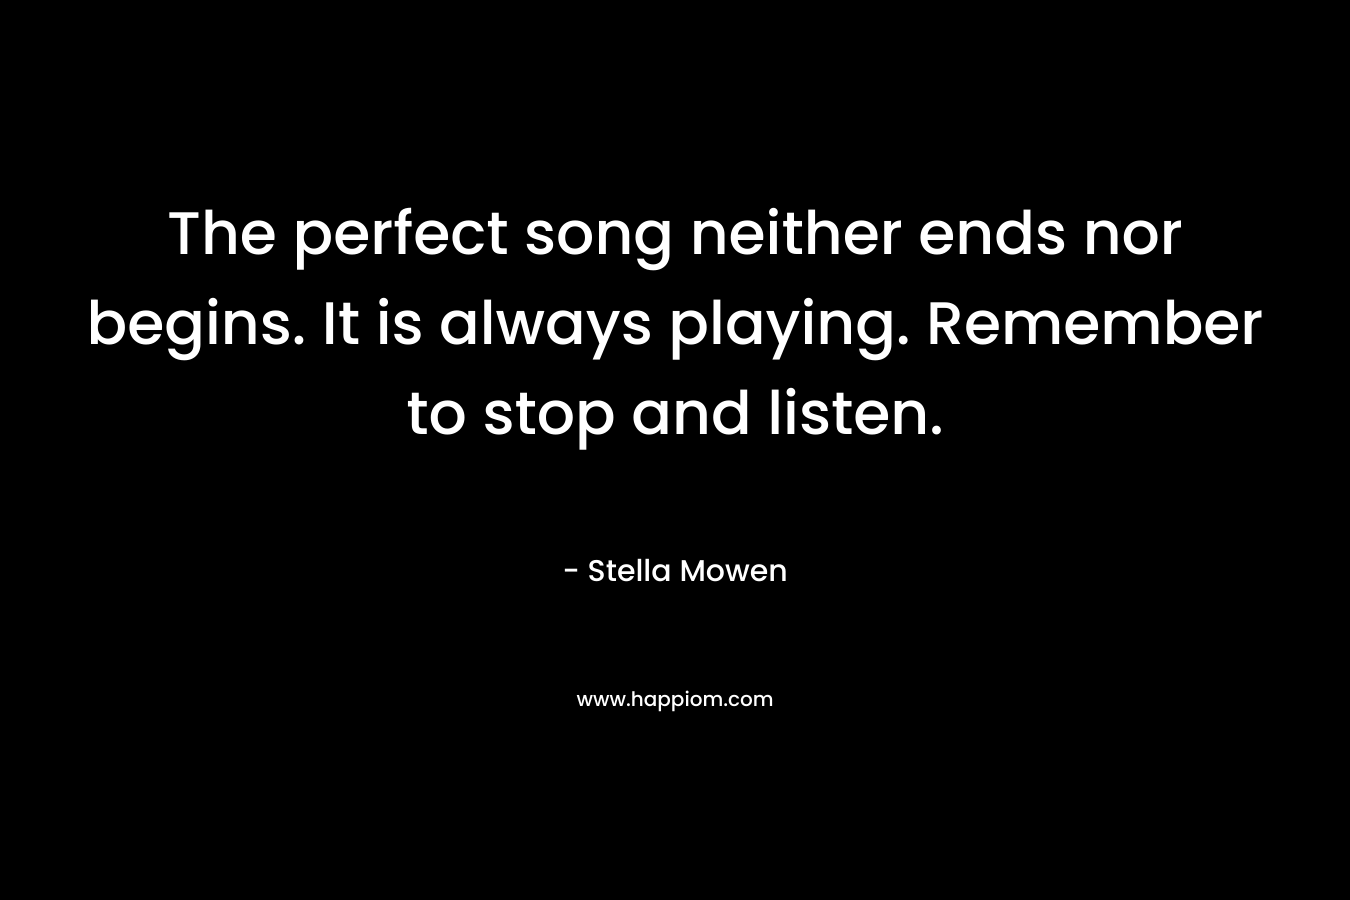 The perfect song neither ends nor begins. It is always playing. Remember to stop and listen.